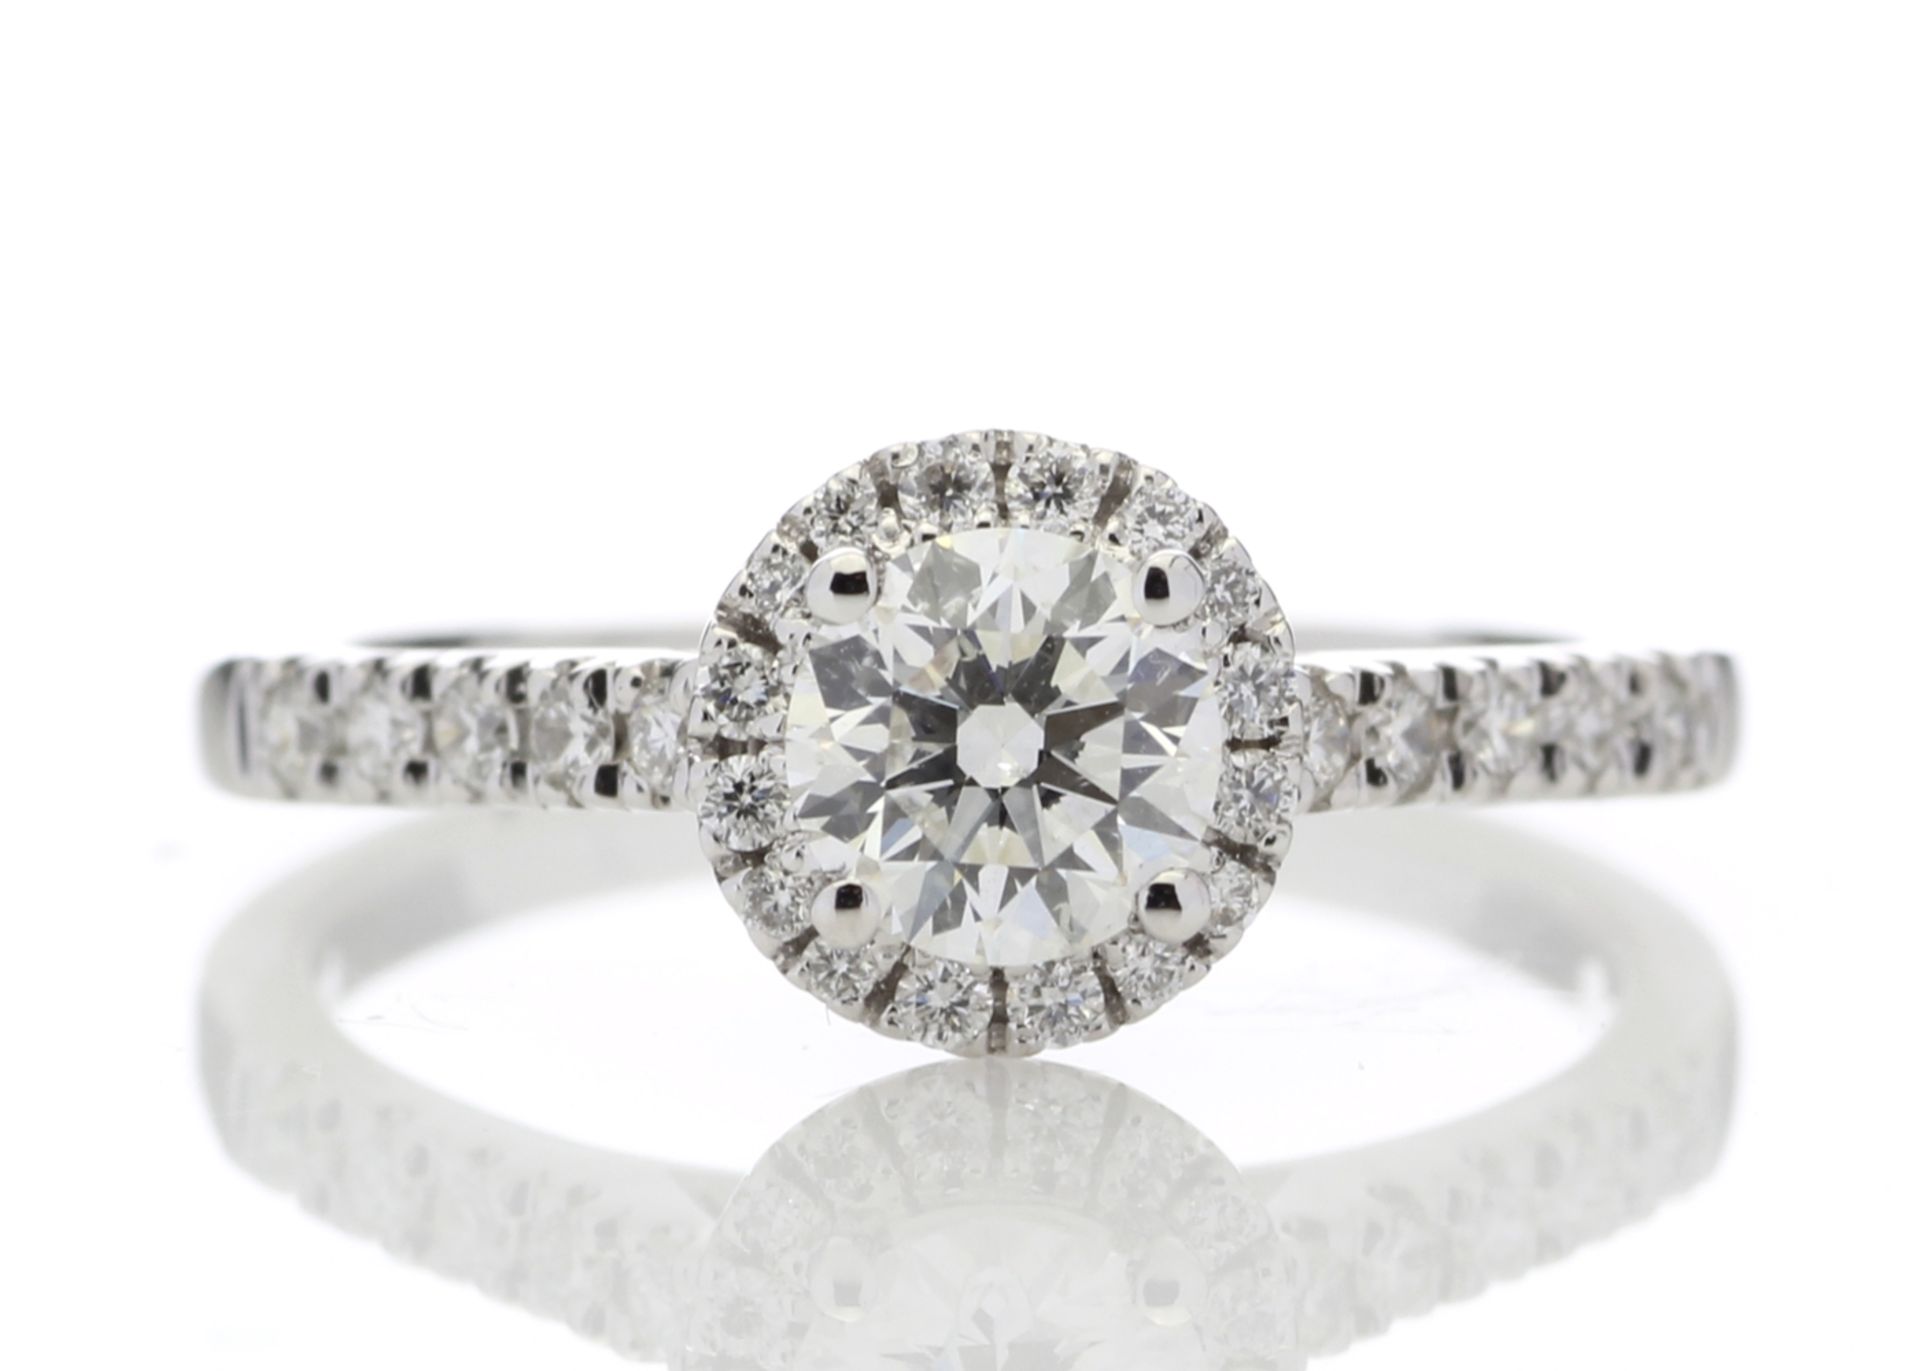 ***£13,250.00*** UNUSED - Certified by GIE 18ct White Gold Single Stone Halo Diamond Ring (0.50) 0.